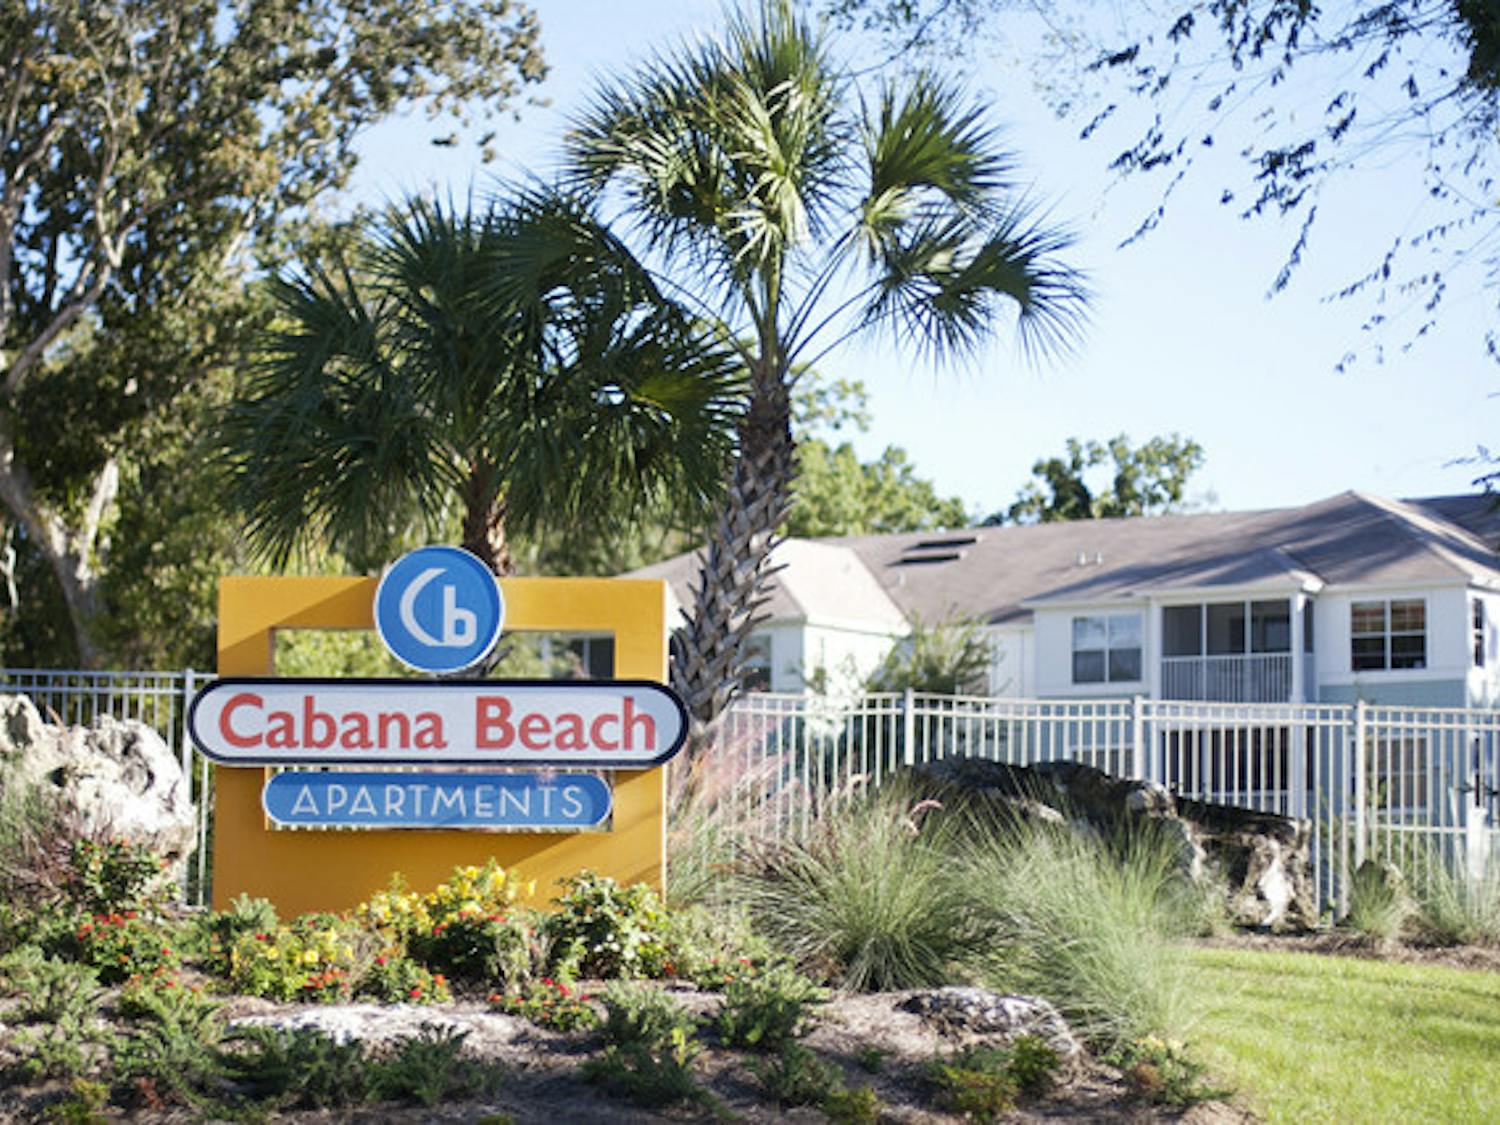 A fatal shooting occurred at Cabana Beach apartment complex at about 3 a.m. Friday morning.